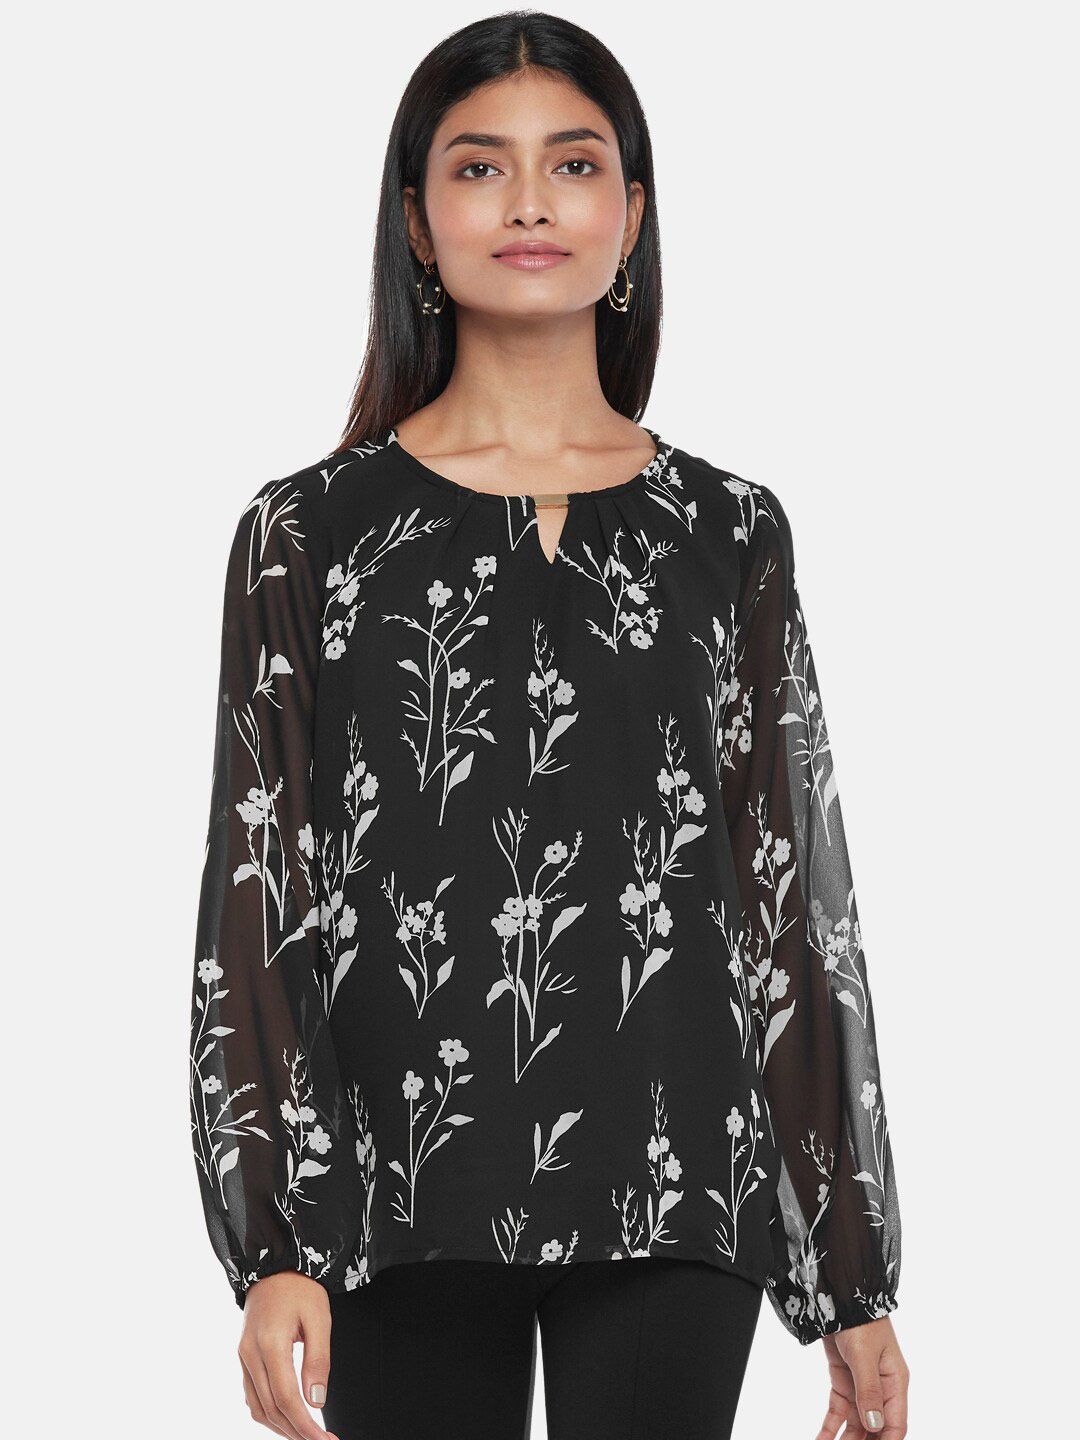 Annabelle by Pantaloons Black Floral Print Keyhole Neck Top Price in India